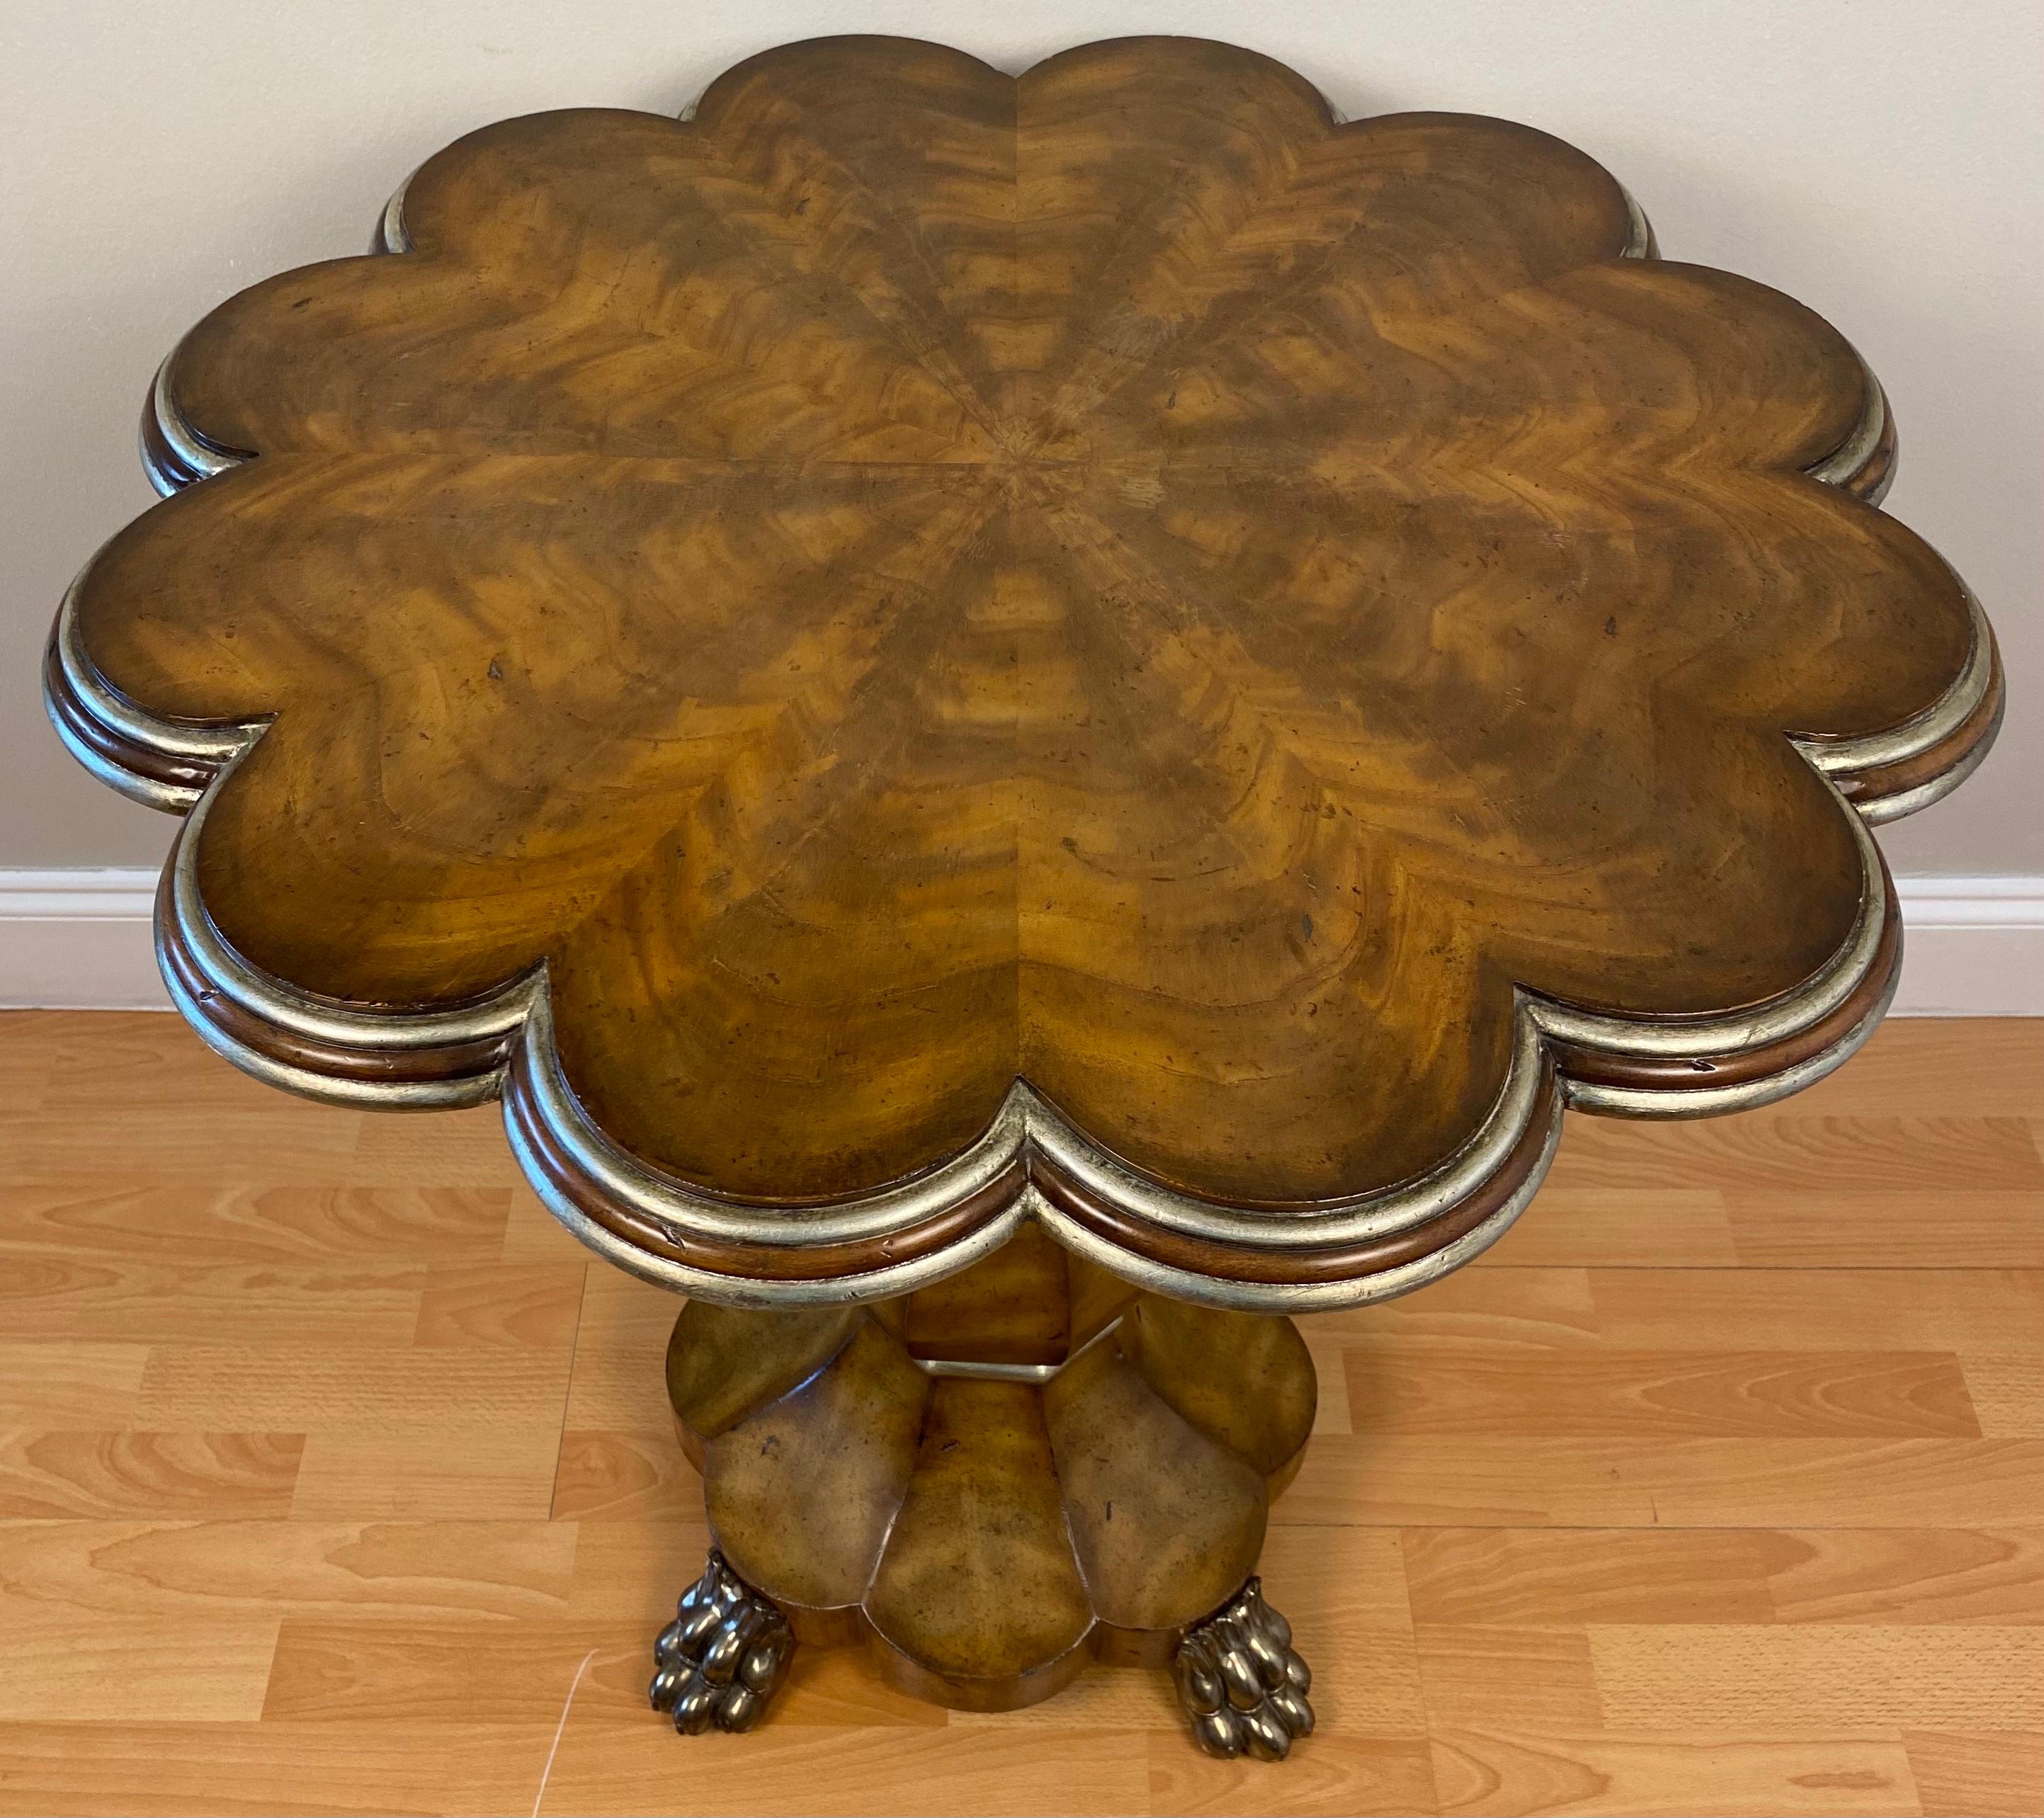 A fine burl mahogany (ronce d'acajou) American designed side table by Maitland Smith. One pedestal on a three legged stand accentuated with a silver leaf wood molding details, framed by carved edges molding and supported by a hand carved detailed